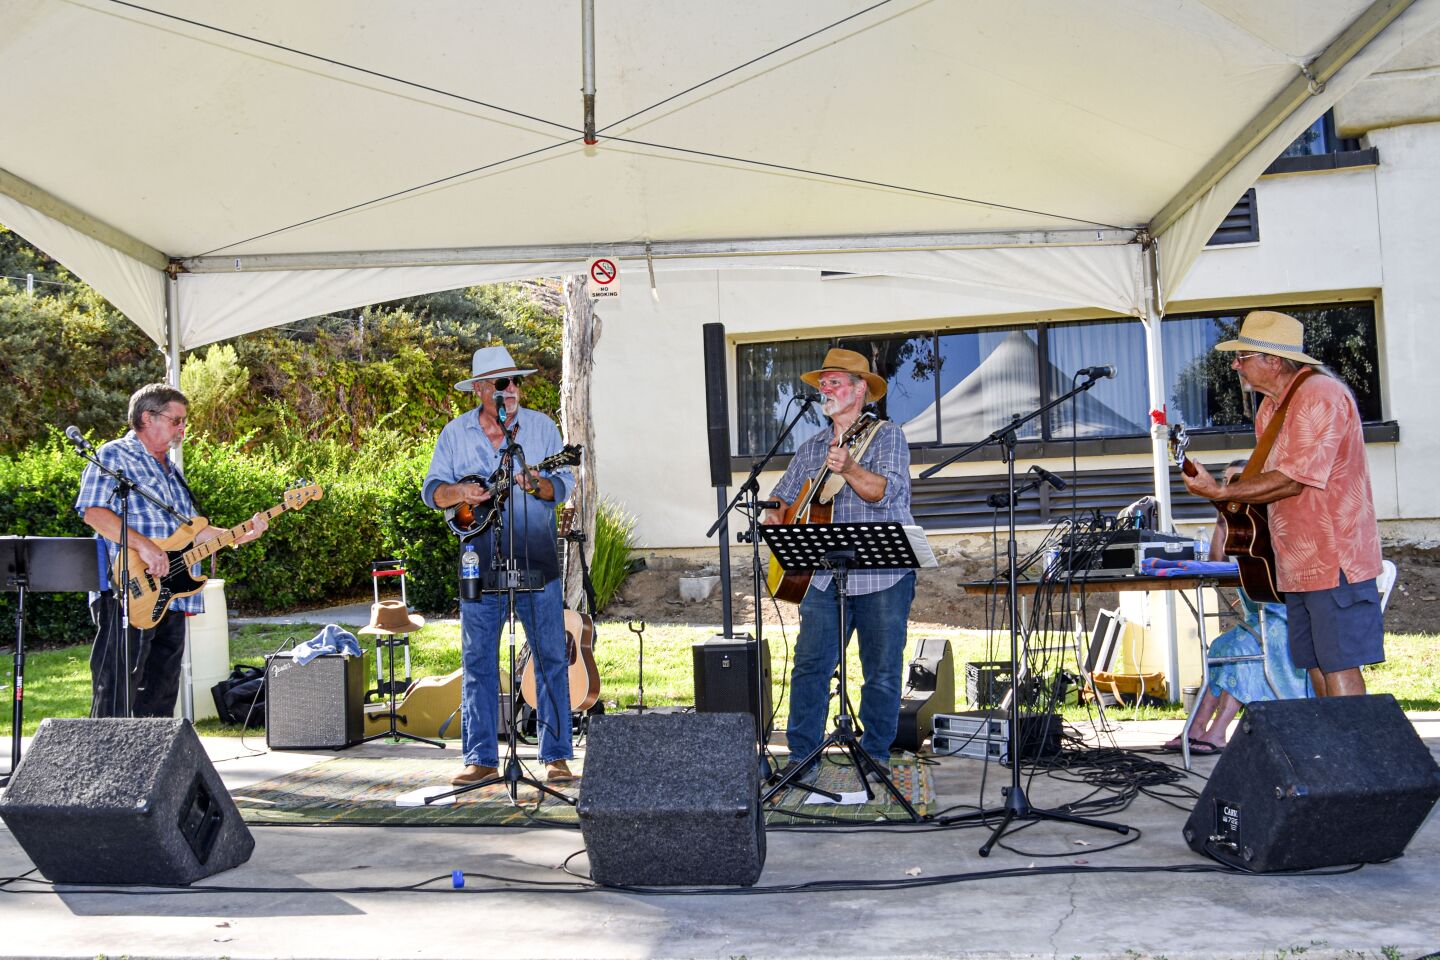 The Shirthouse Bluegrass Band, from left, Len Claesson, Peter Lauterbach, Rob Lewallen, and Scott Ensign.